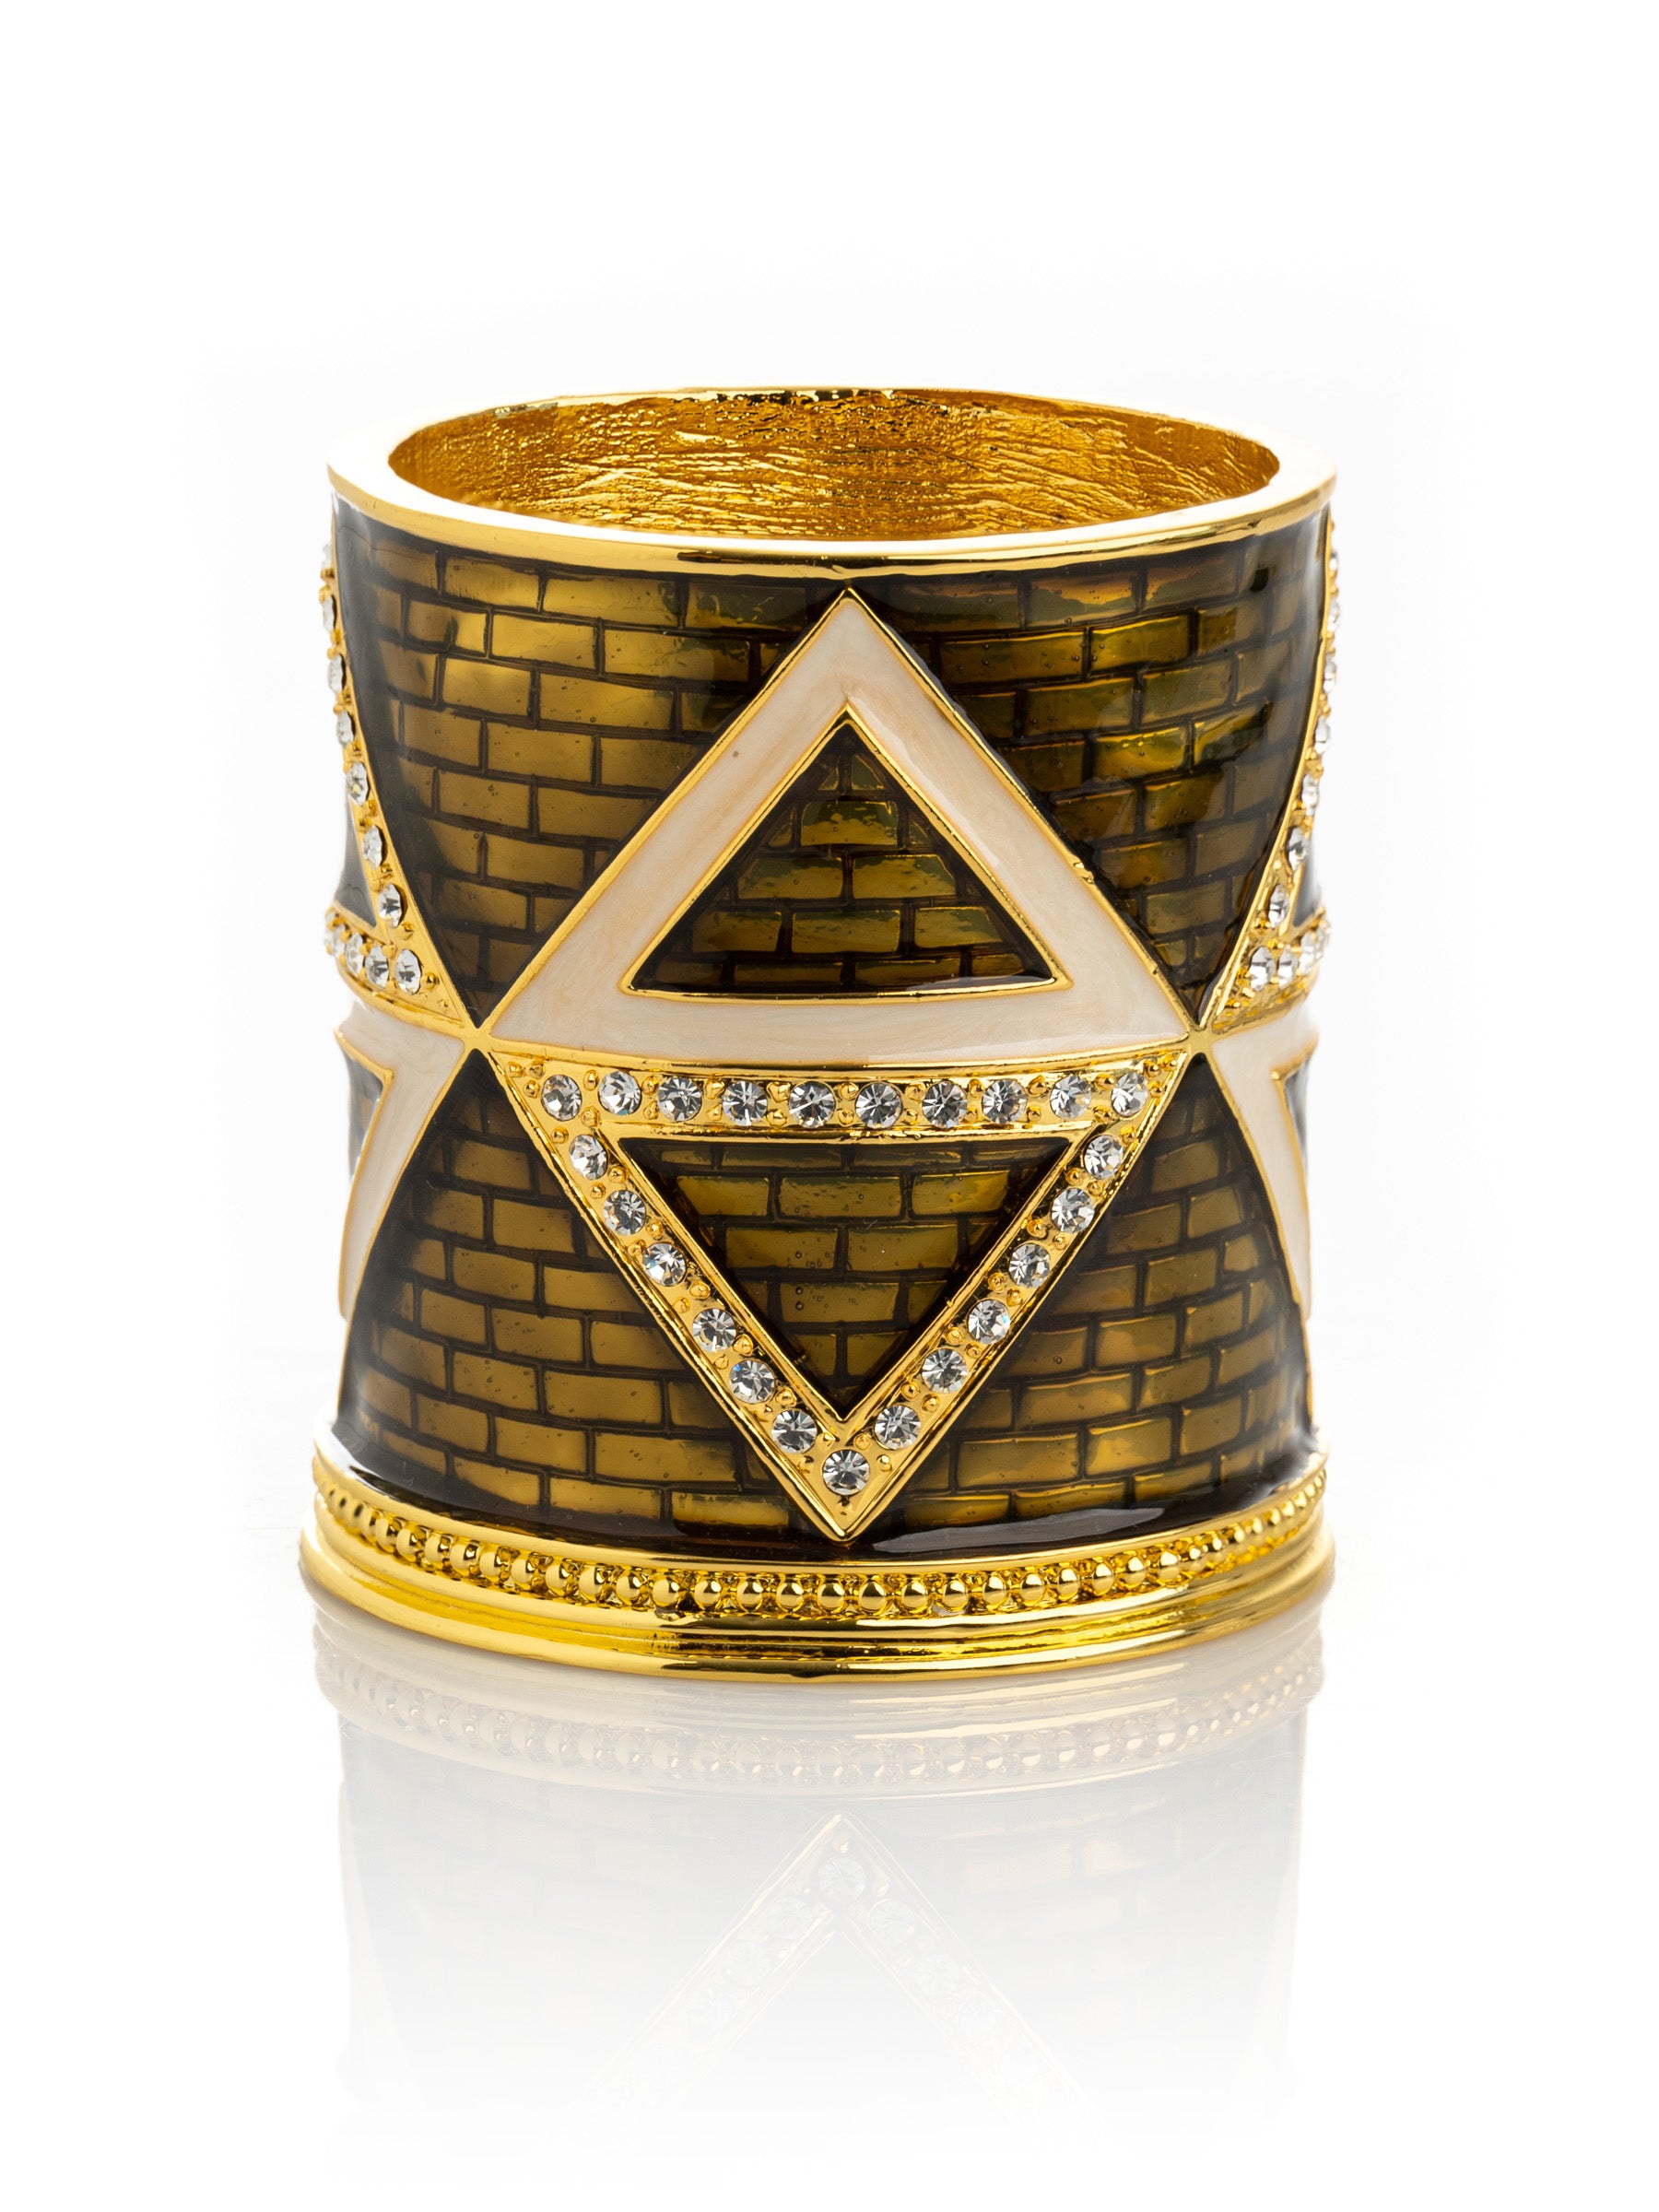 Golden Brown Decorated Candle Holder with Triangles Pattern